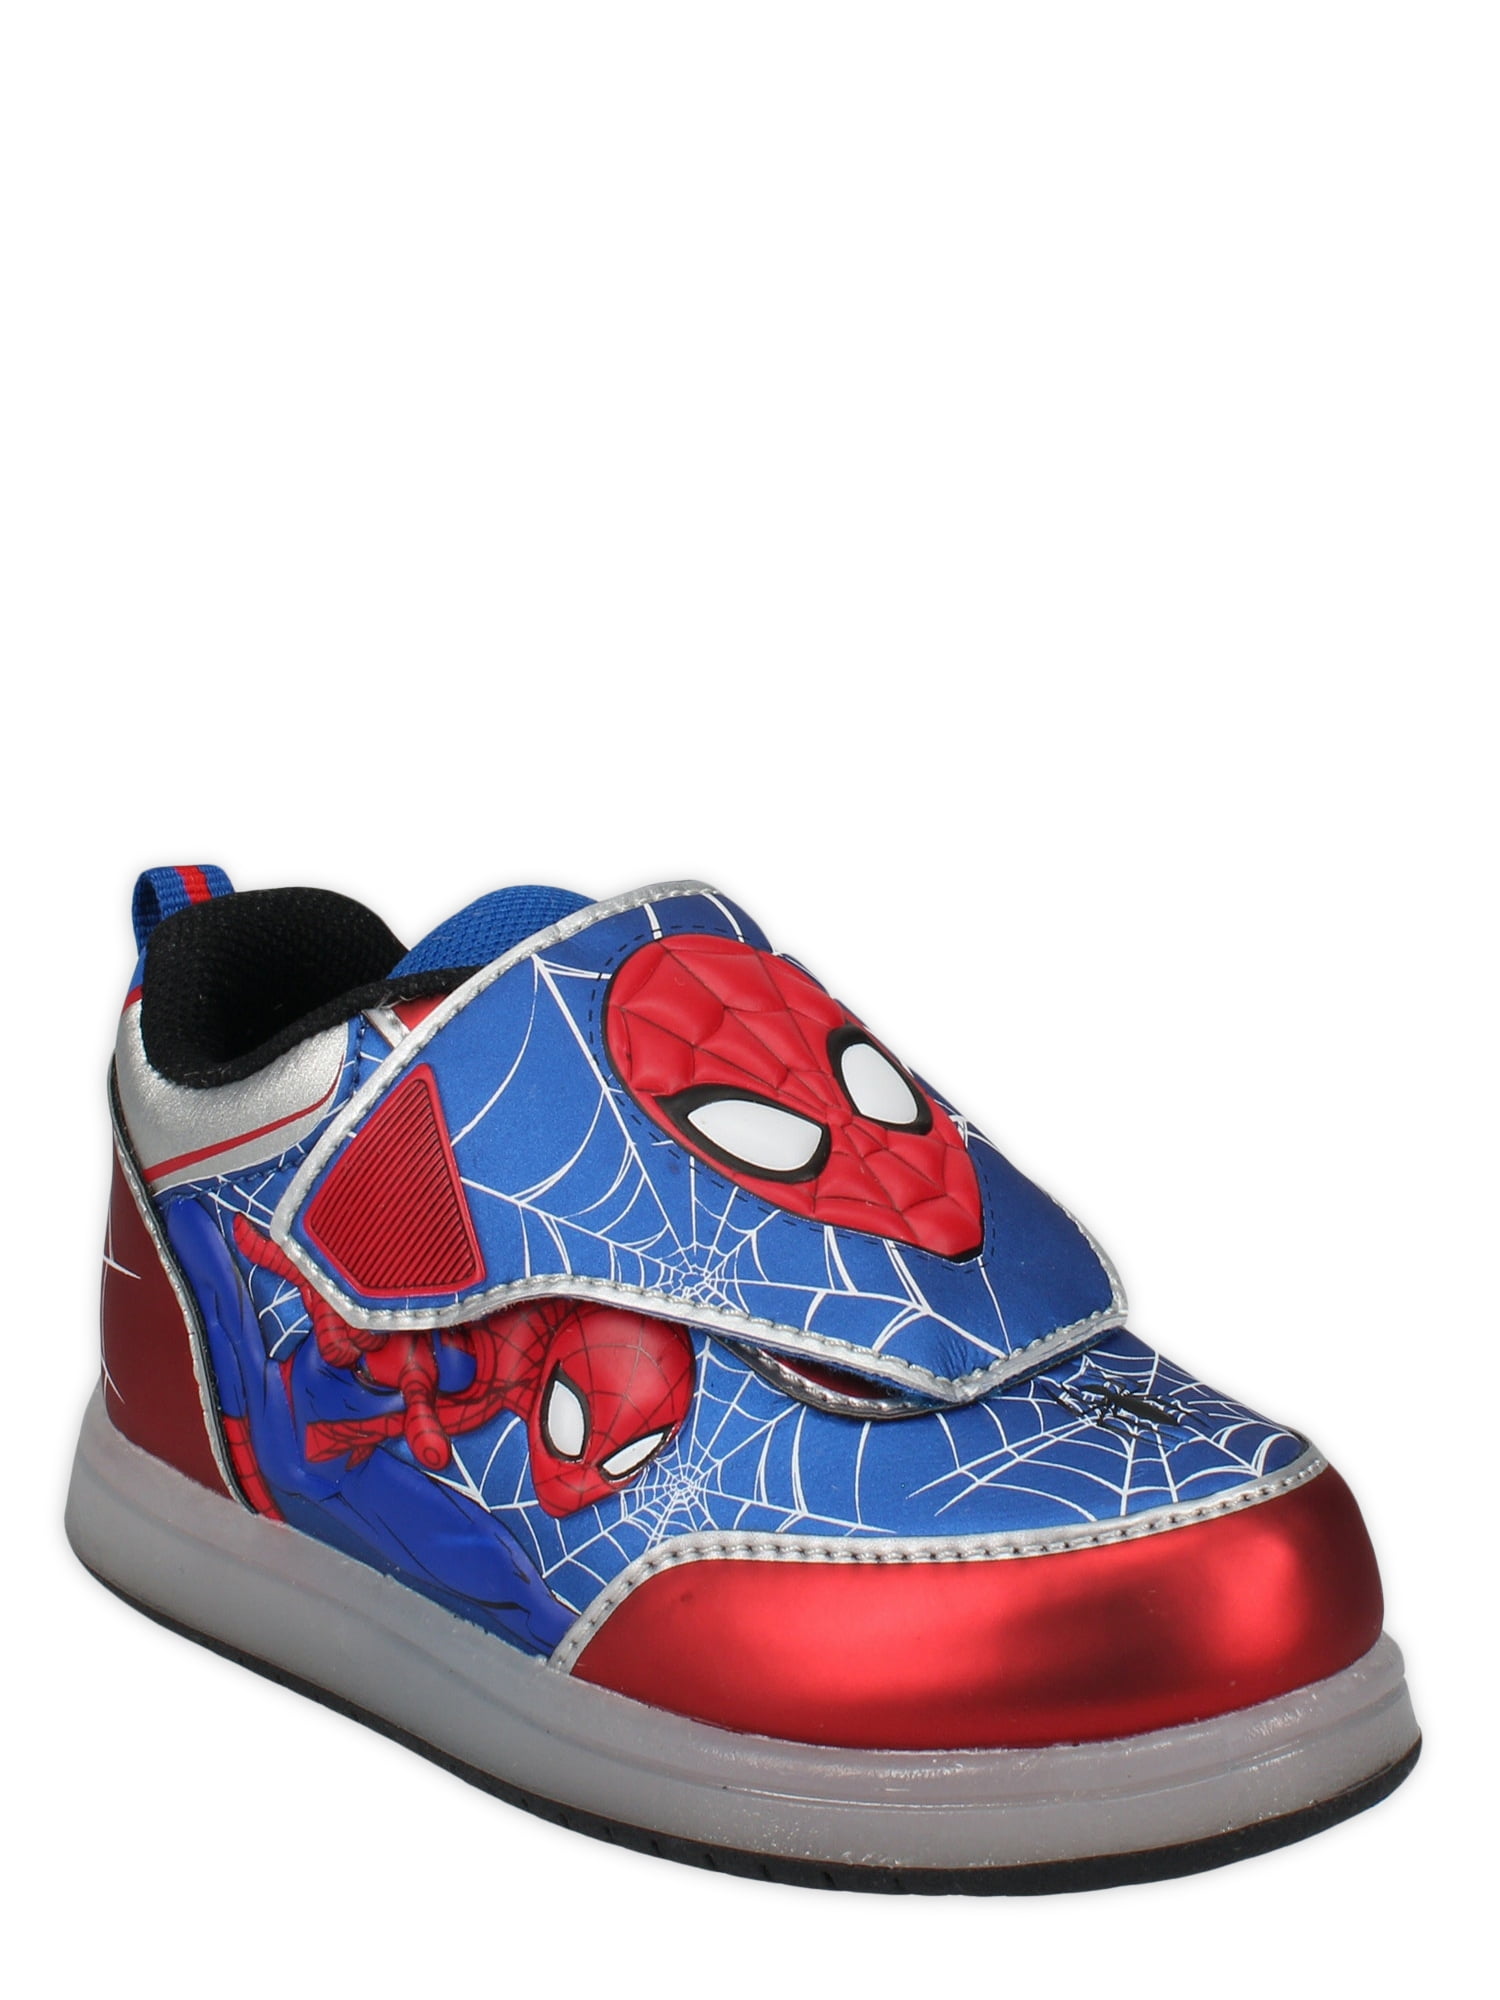 MARVEL Boys Spiderman Light Up Canvas Trainers Kids Pumps with Flashing Lights 